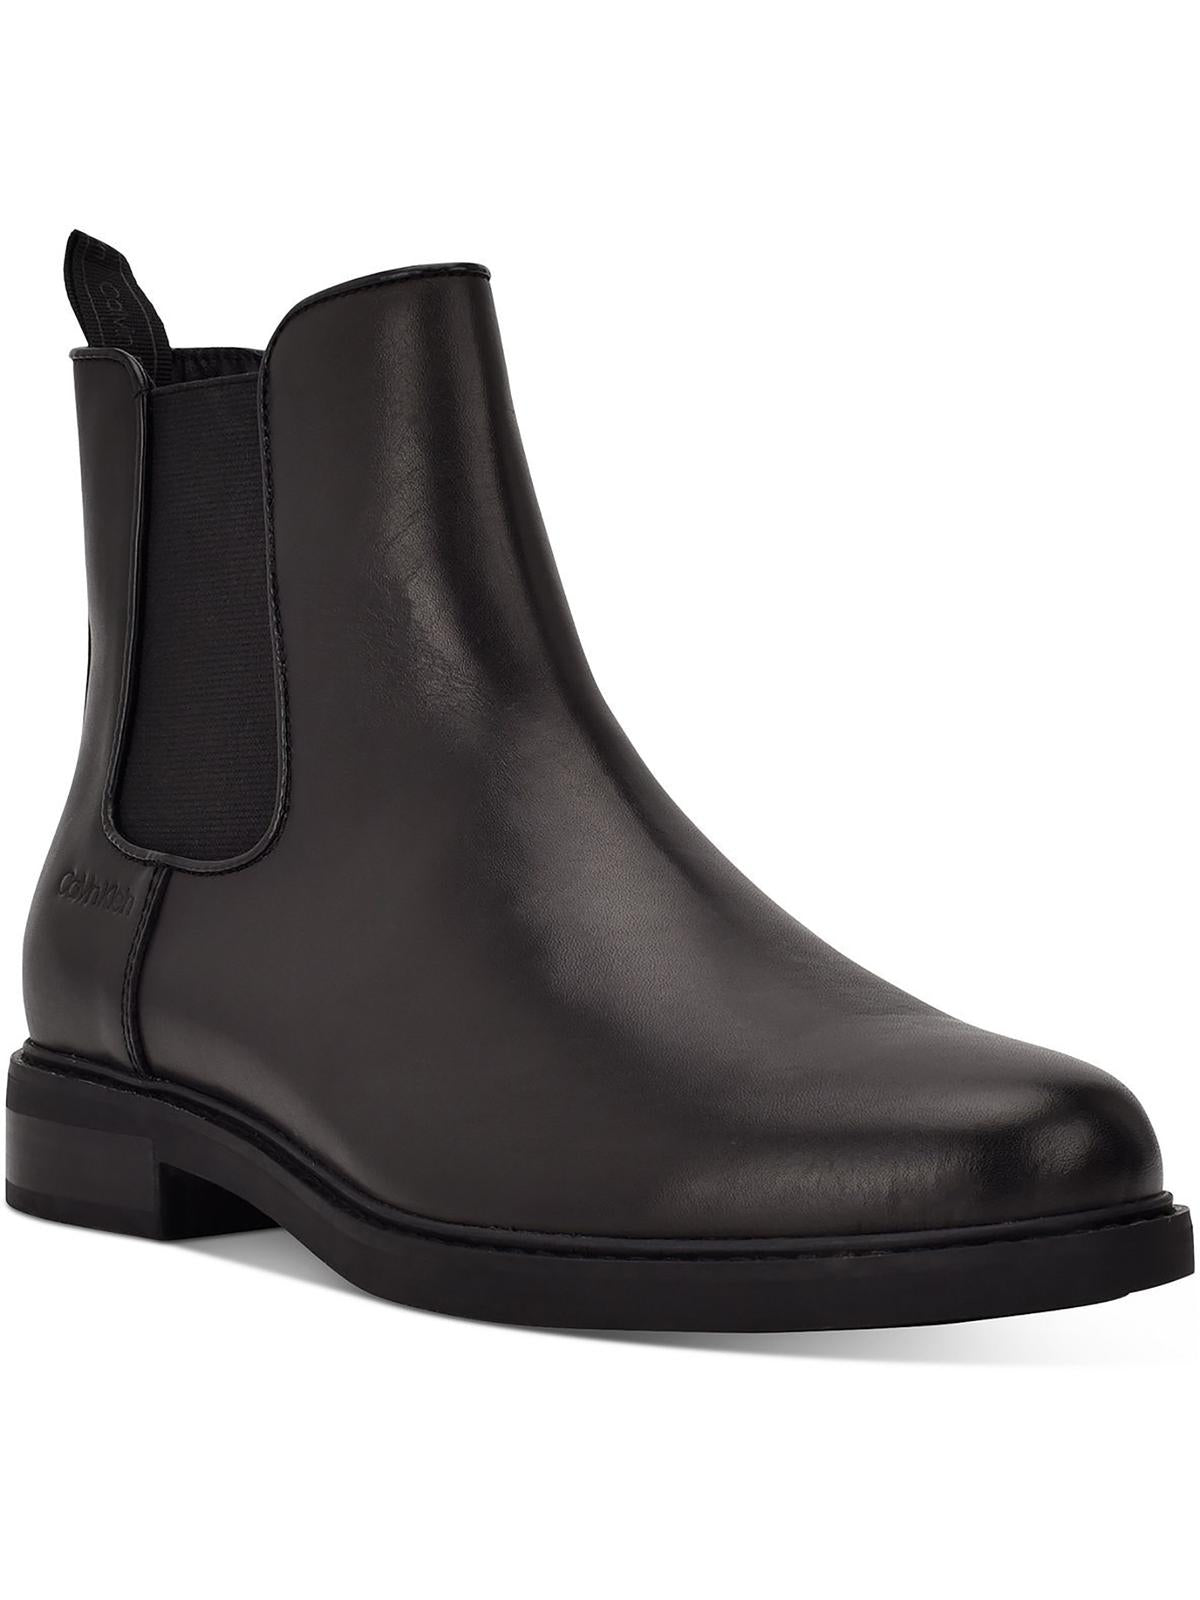 CALVIN KLEIN Fenwick Mens Leather Ankle Chelsea Boots